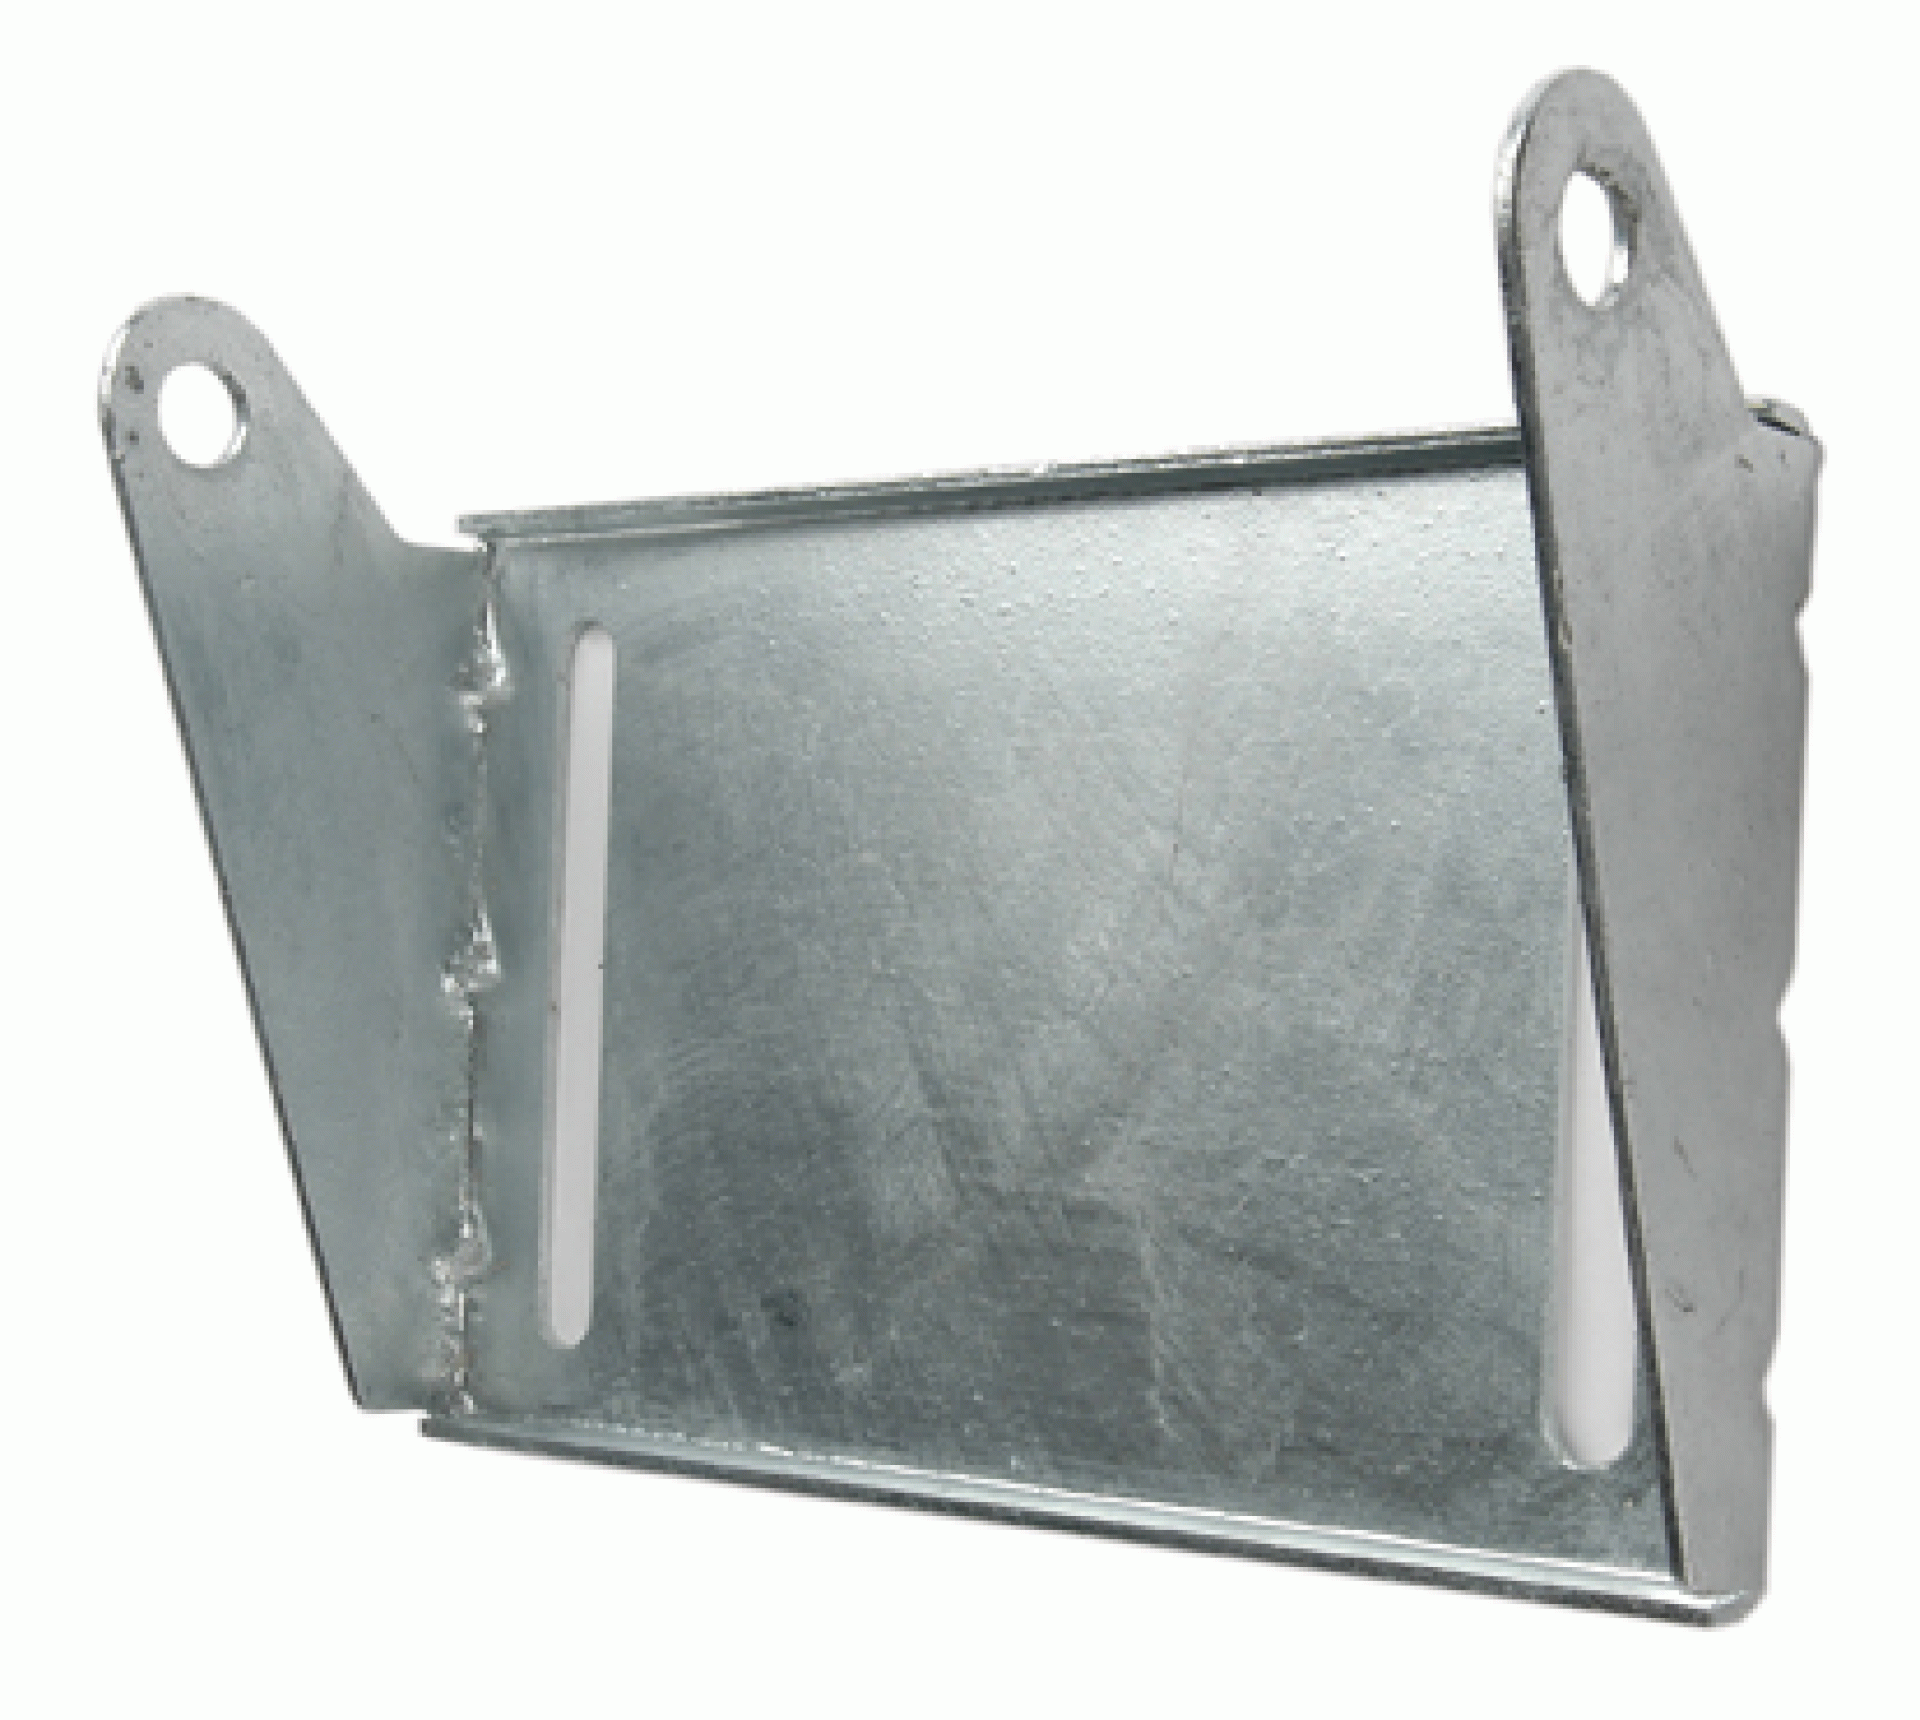 C. E. SMITH CO. INC | 10304G40 | PANEL BRACKET - DESIGNED FOR 10" ROLLERS